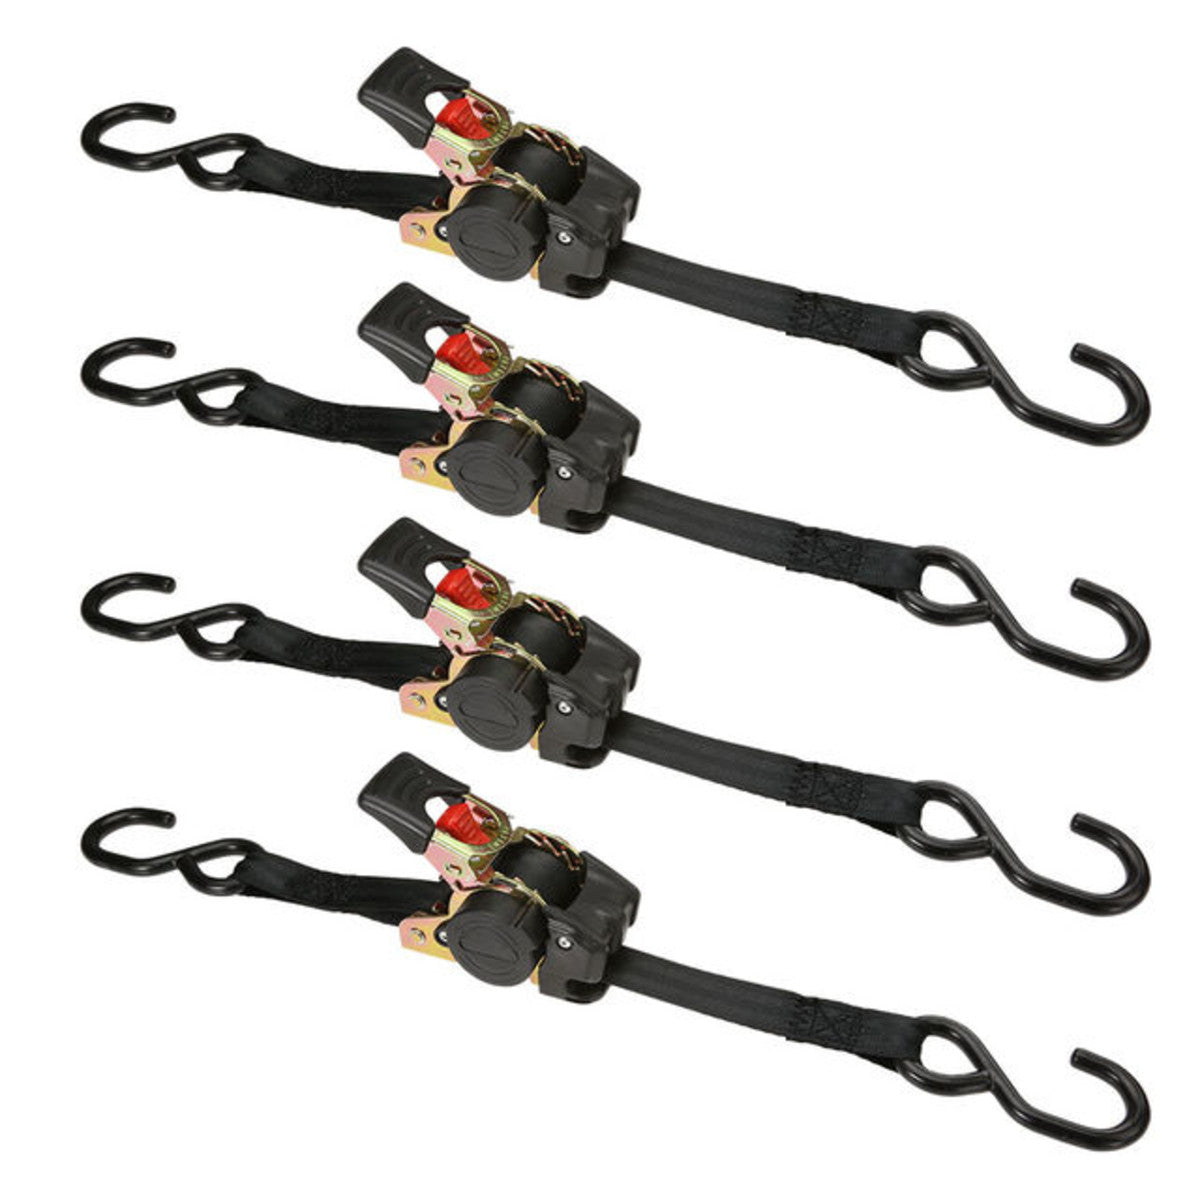 1 inch x 6' Retractable Ratchet w/ Vinyl Coated S-Hooks and Push Button